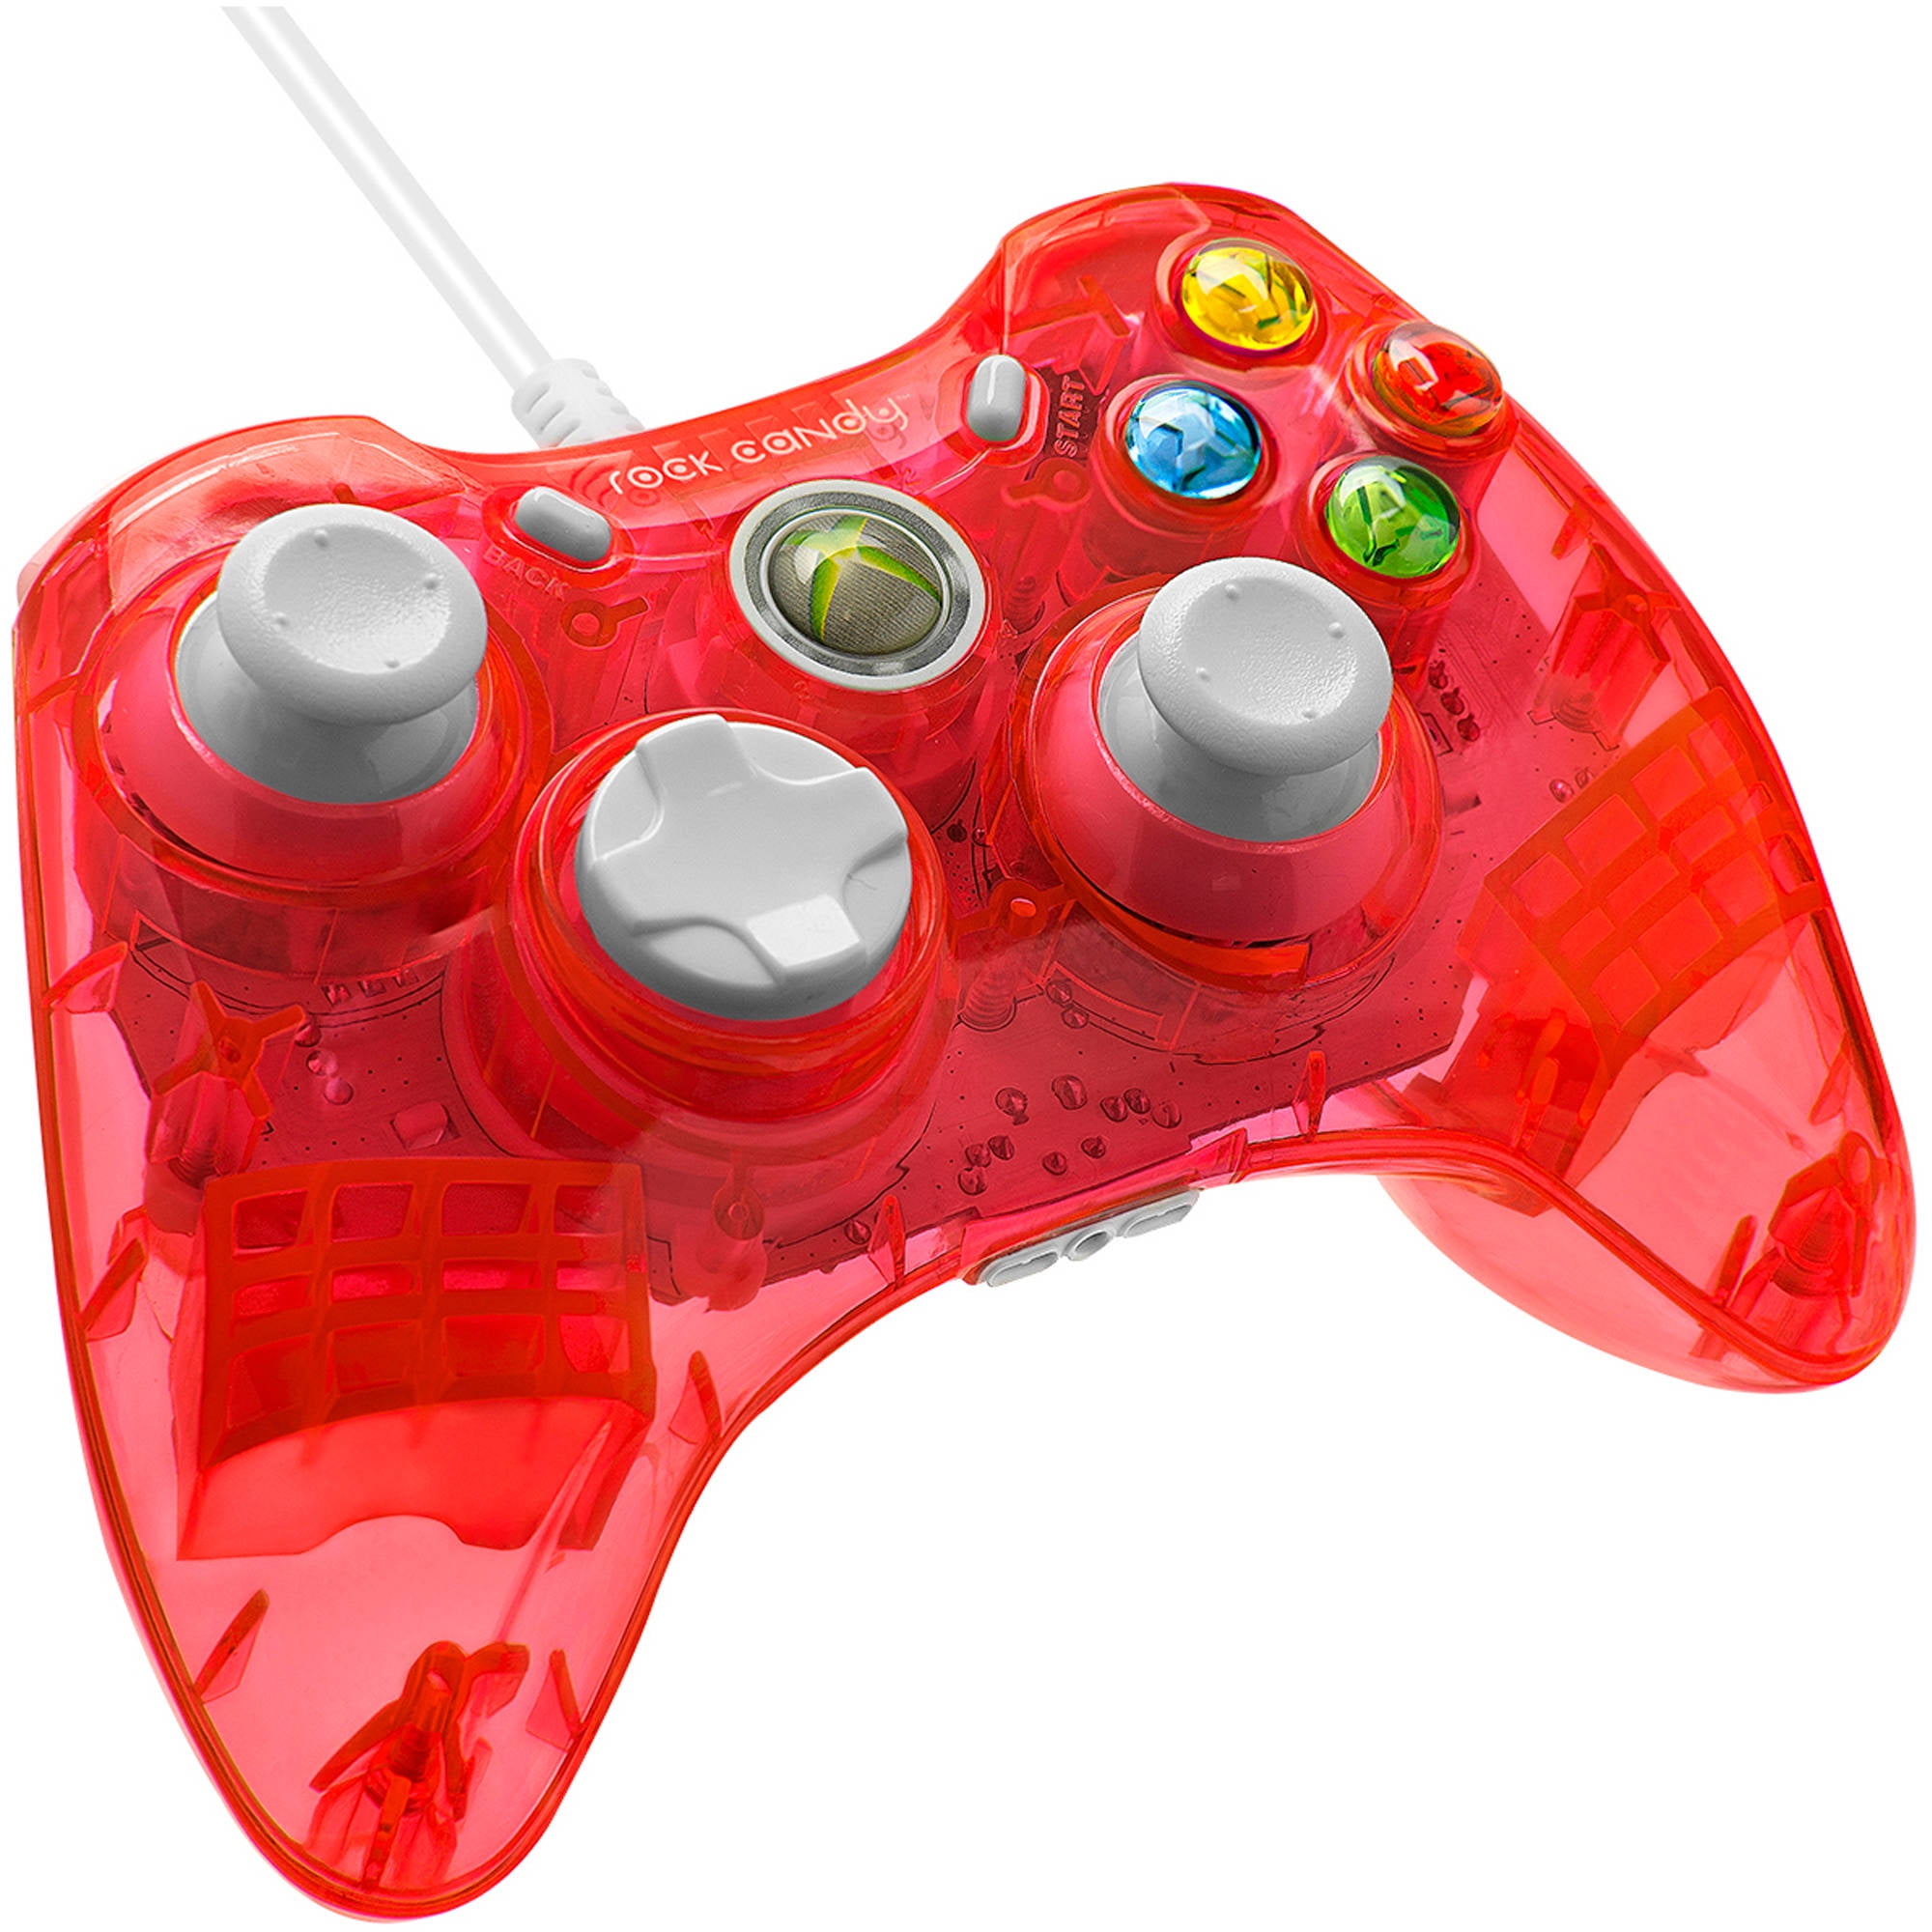 Rock Candy Wired Controller for Xbox 360, Blu-merang - Walmart.com